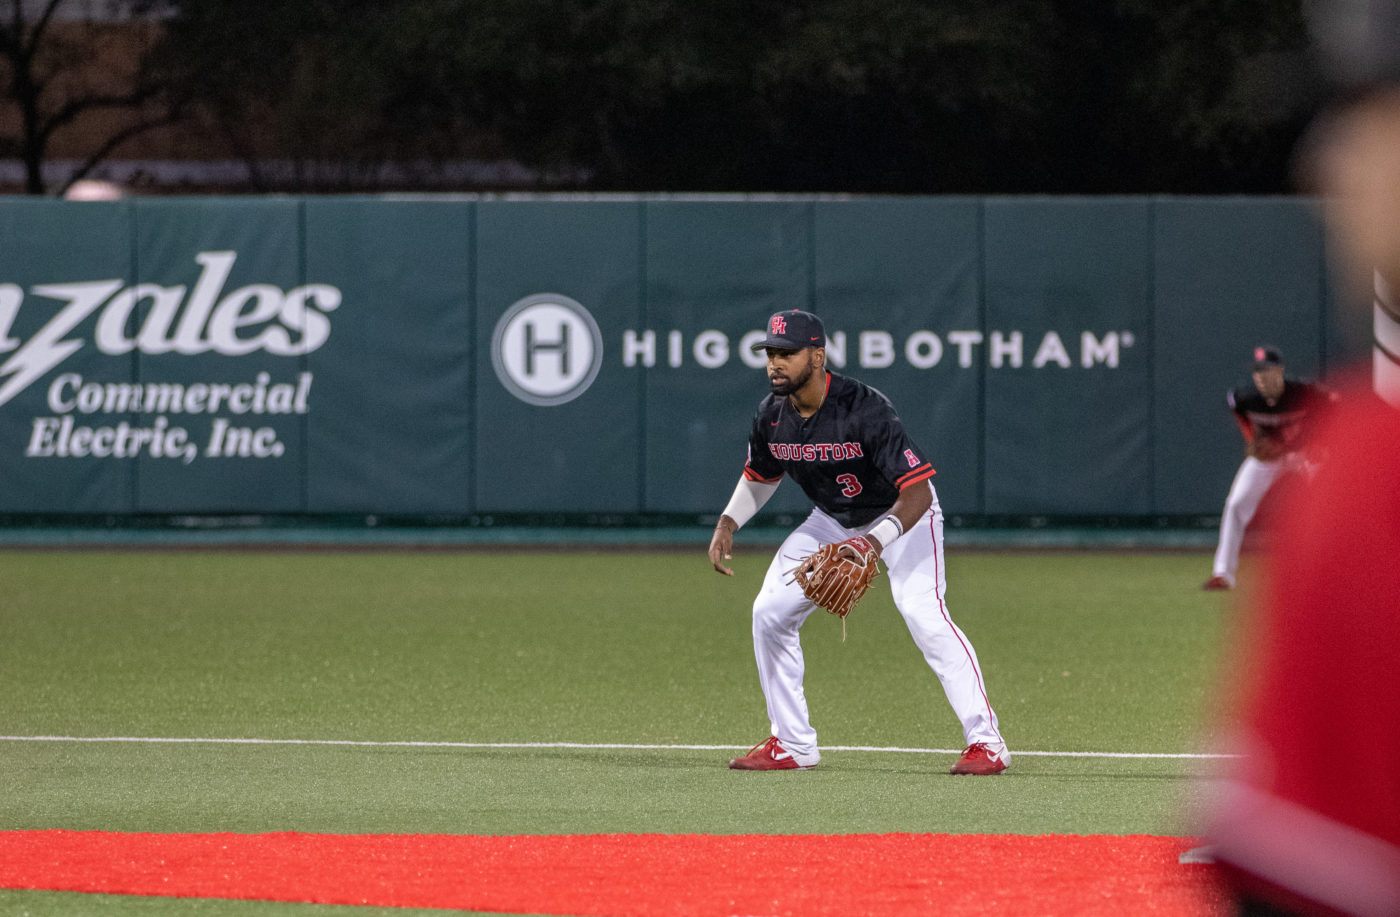 Junior shortstop Kobe Hyland hit for two RBIs in the Cougars’ 12-4 loss to the Texas State Bobcats on Sunday at Schroeder Park. | Jhair Romero/The Cougar